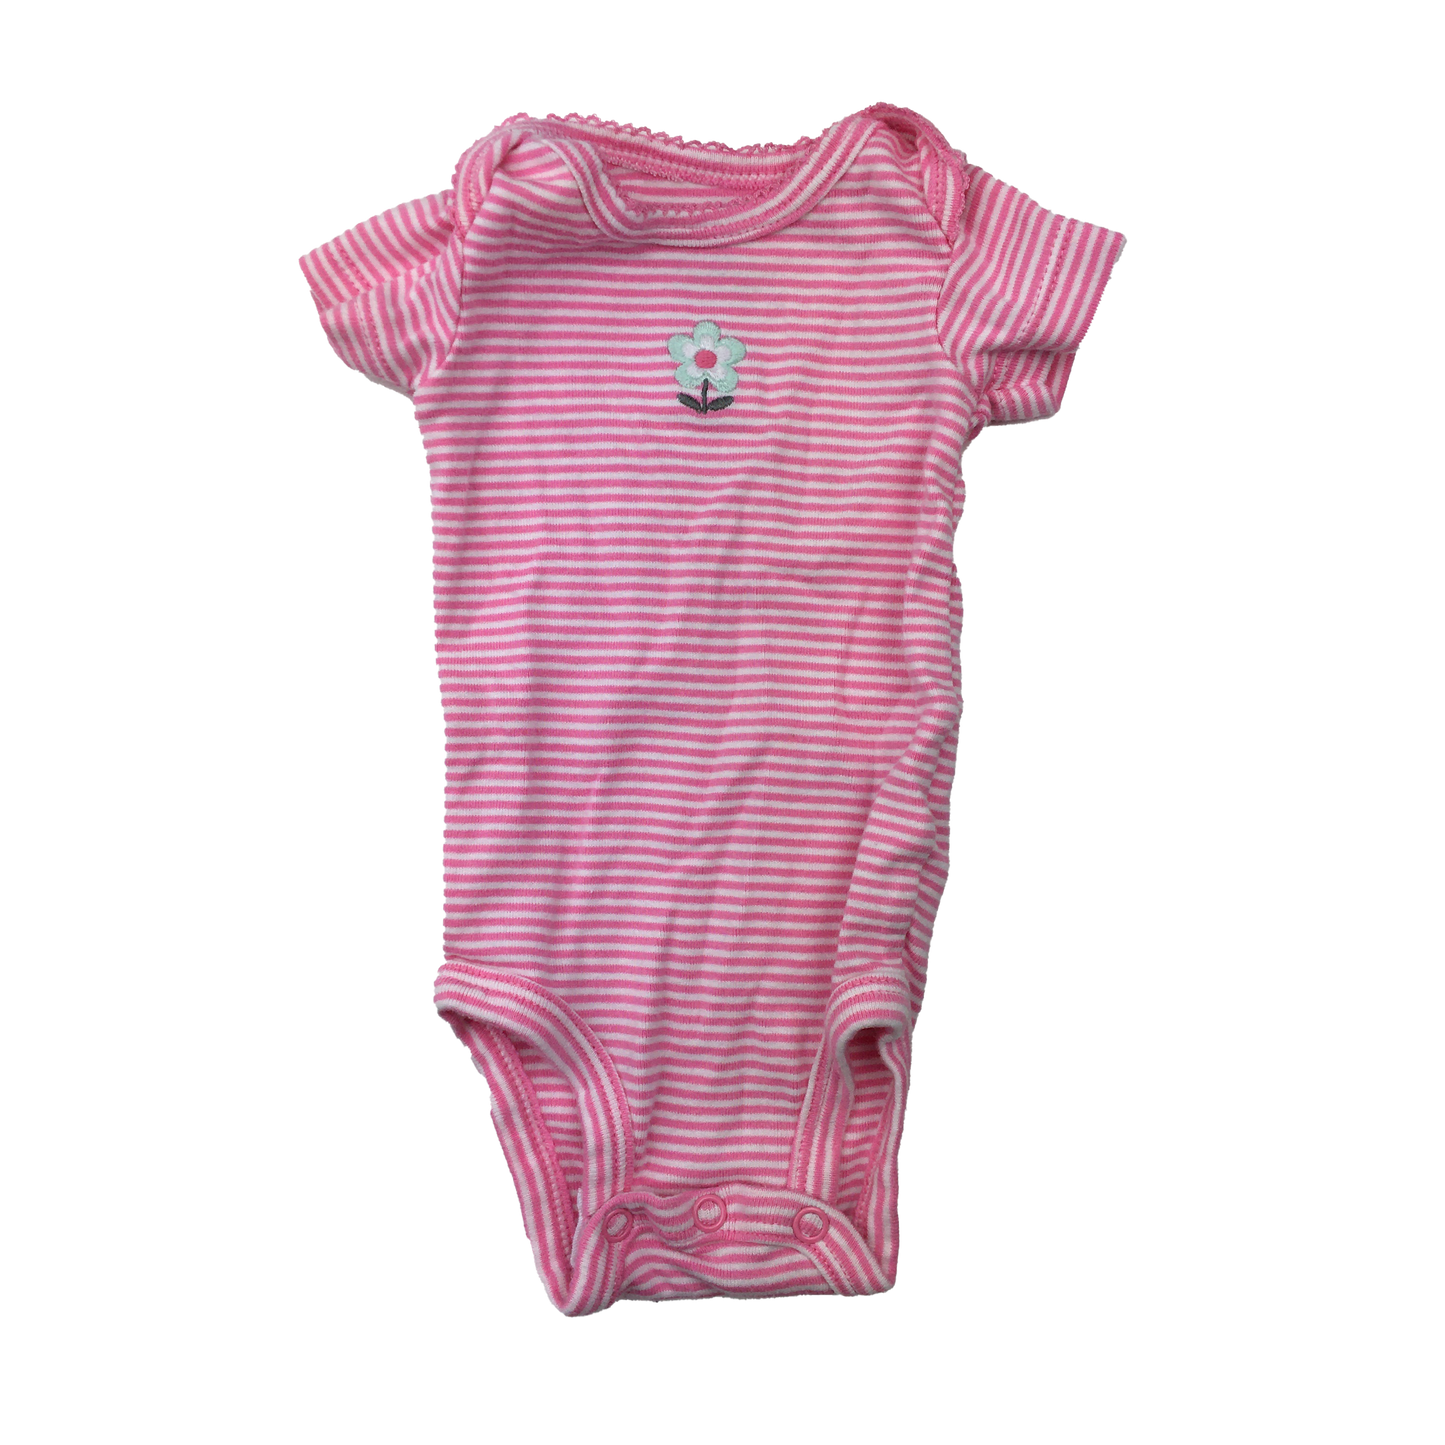 Carter's Pink Striped Onesie with Flower NB